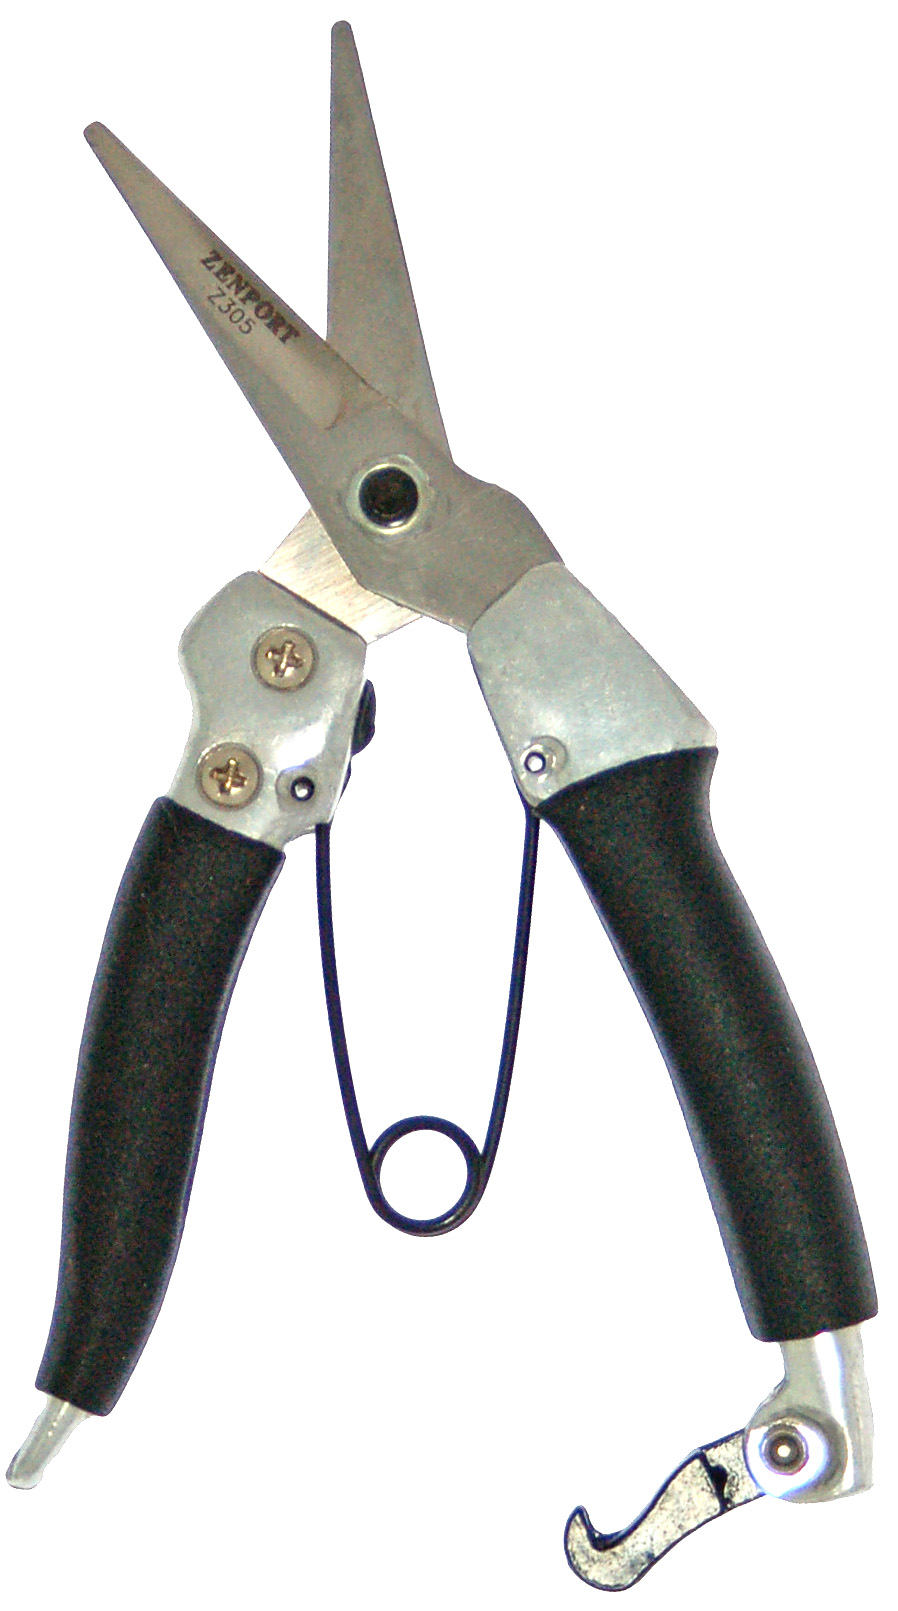 Zenport Pruner Z305 Japanese Forged Pro, 8-Inches Long, 1-Inch Cut